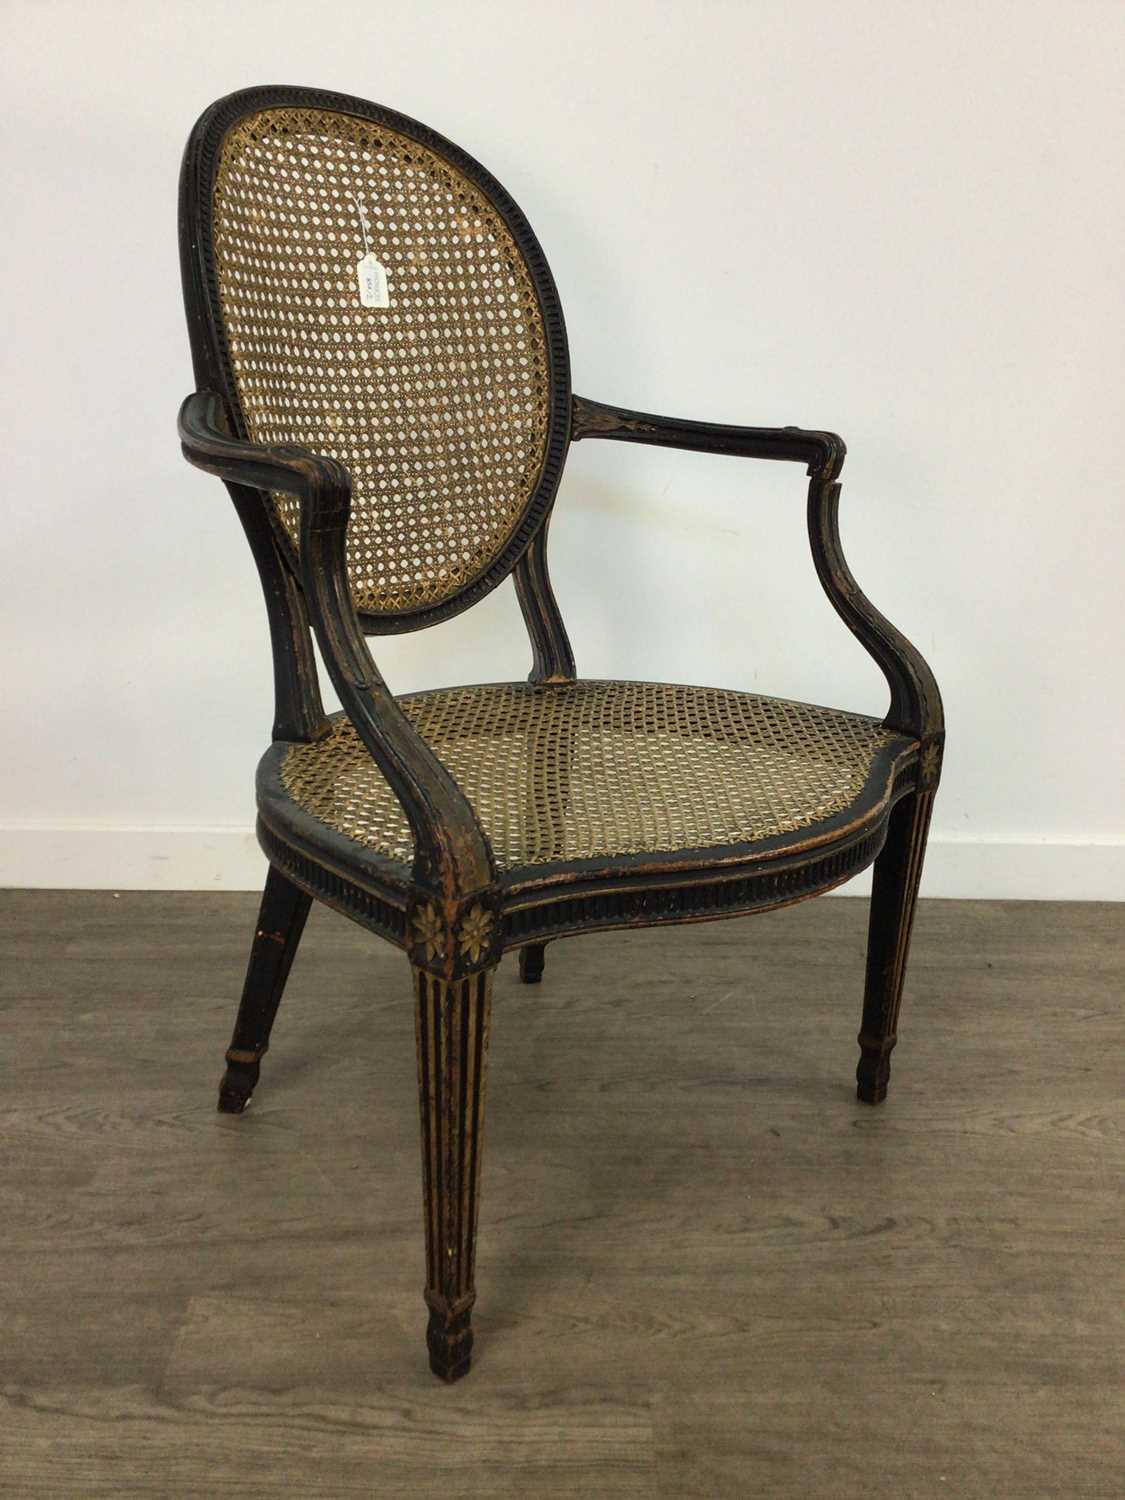 Lot 854 - A PAIR OF LATE 18TH/EARLY 19TH CENTURY FRENCH EBONISED ELBOW CHAIRS